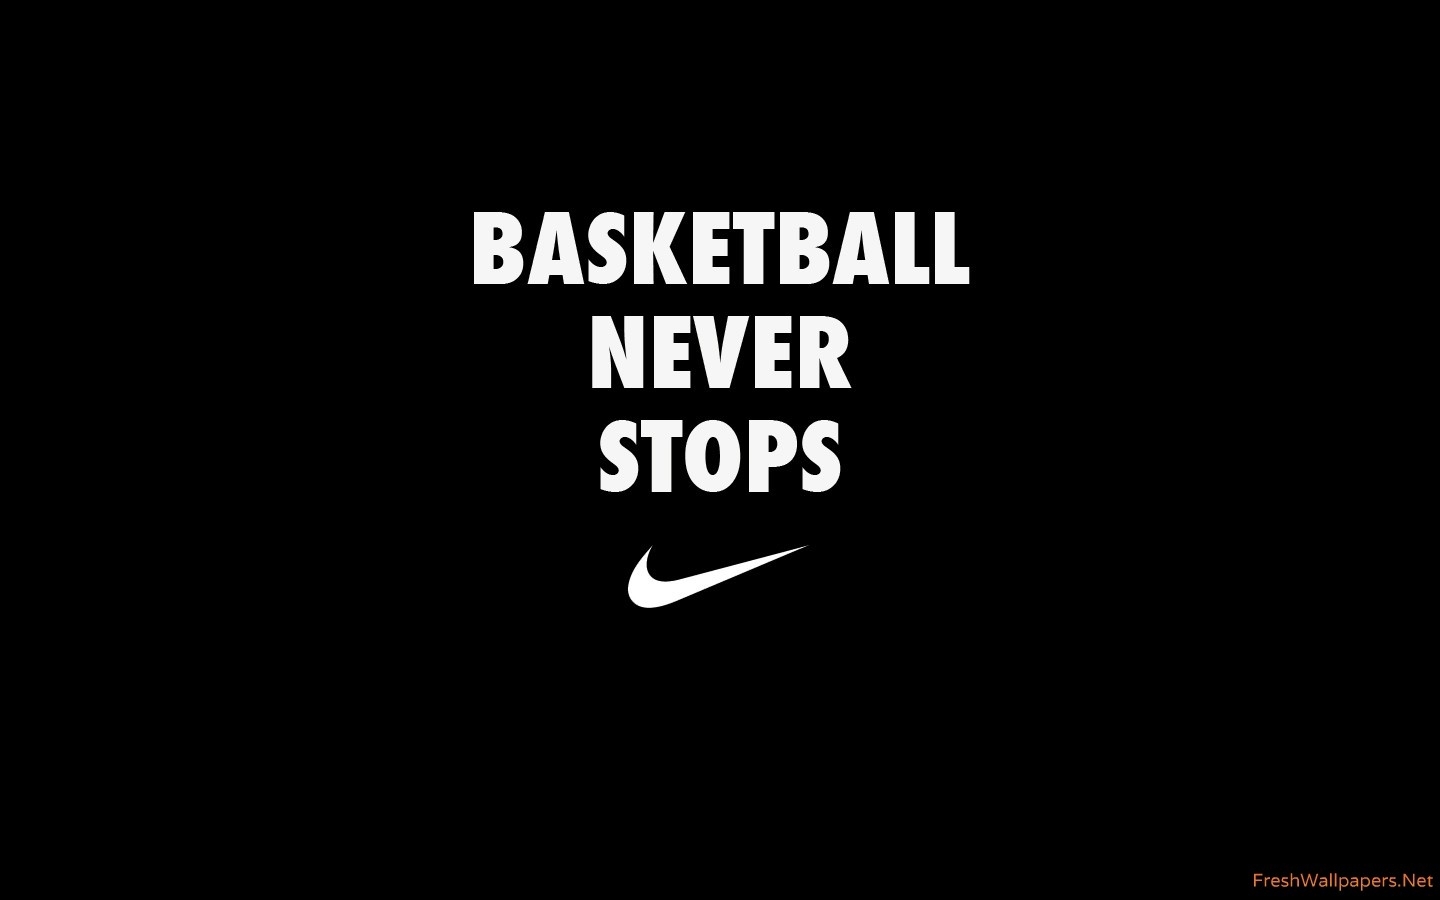 10 Best Basketball Never Stops Wallpapers FULL HD 1080p For PC Background